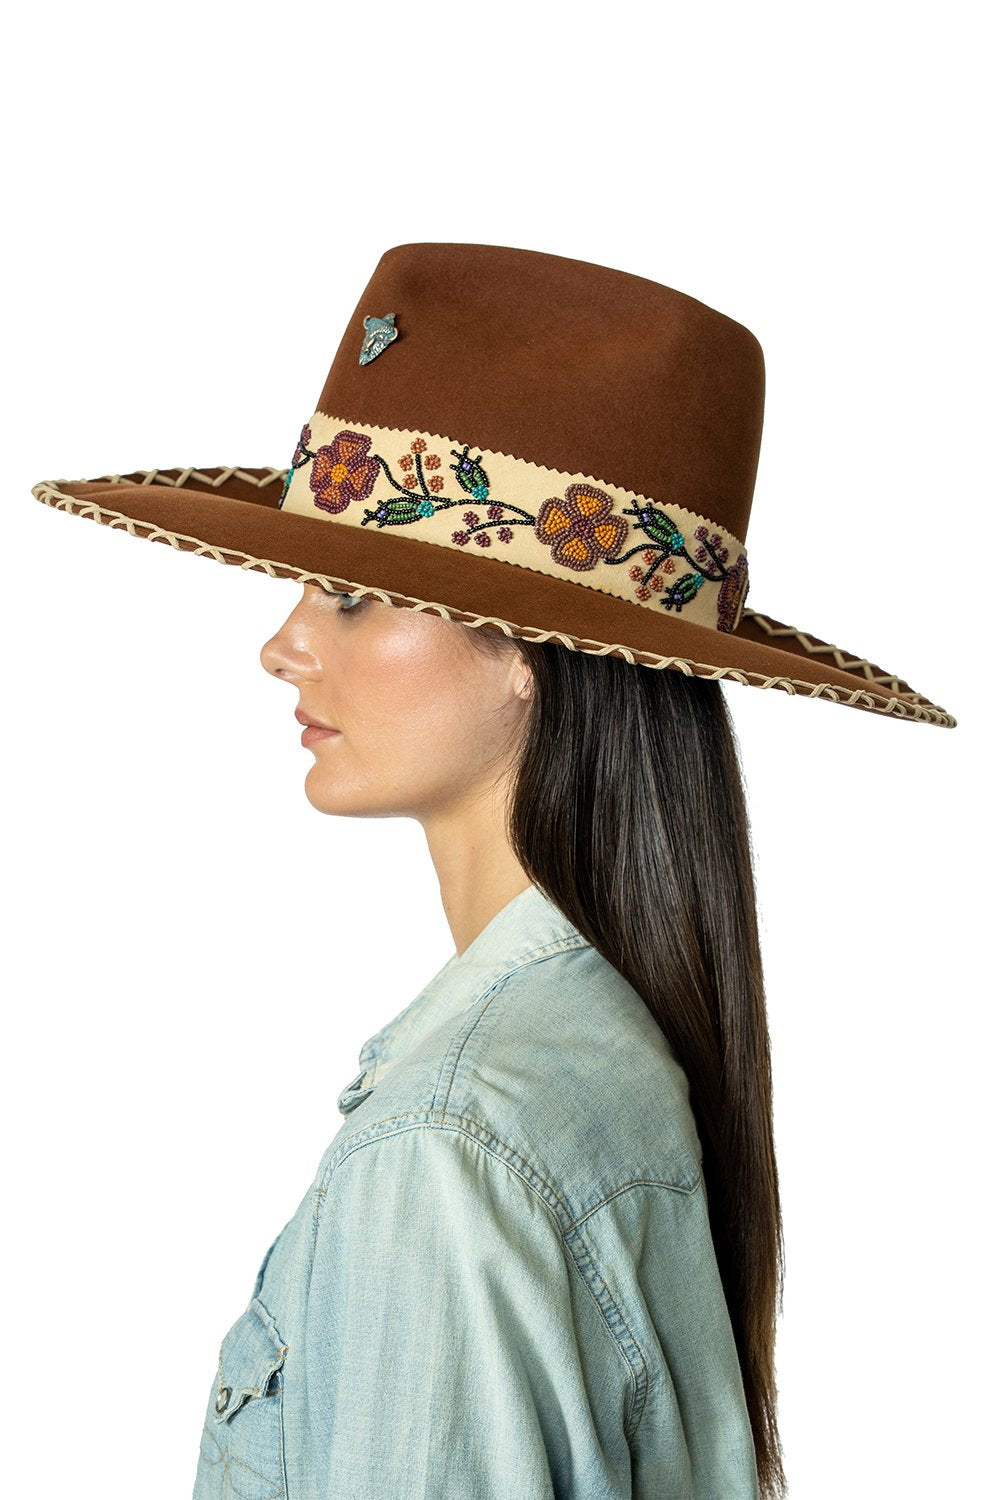 DDR Felt Showman Hat in bay brown FA794 Fall Cody Collection at 6Whiskey six whisky